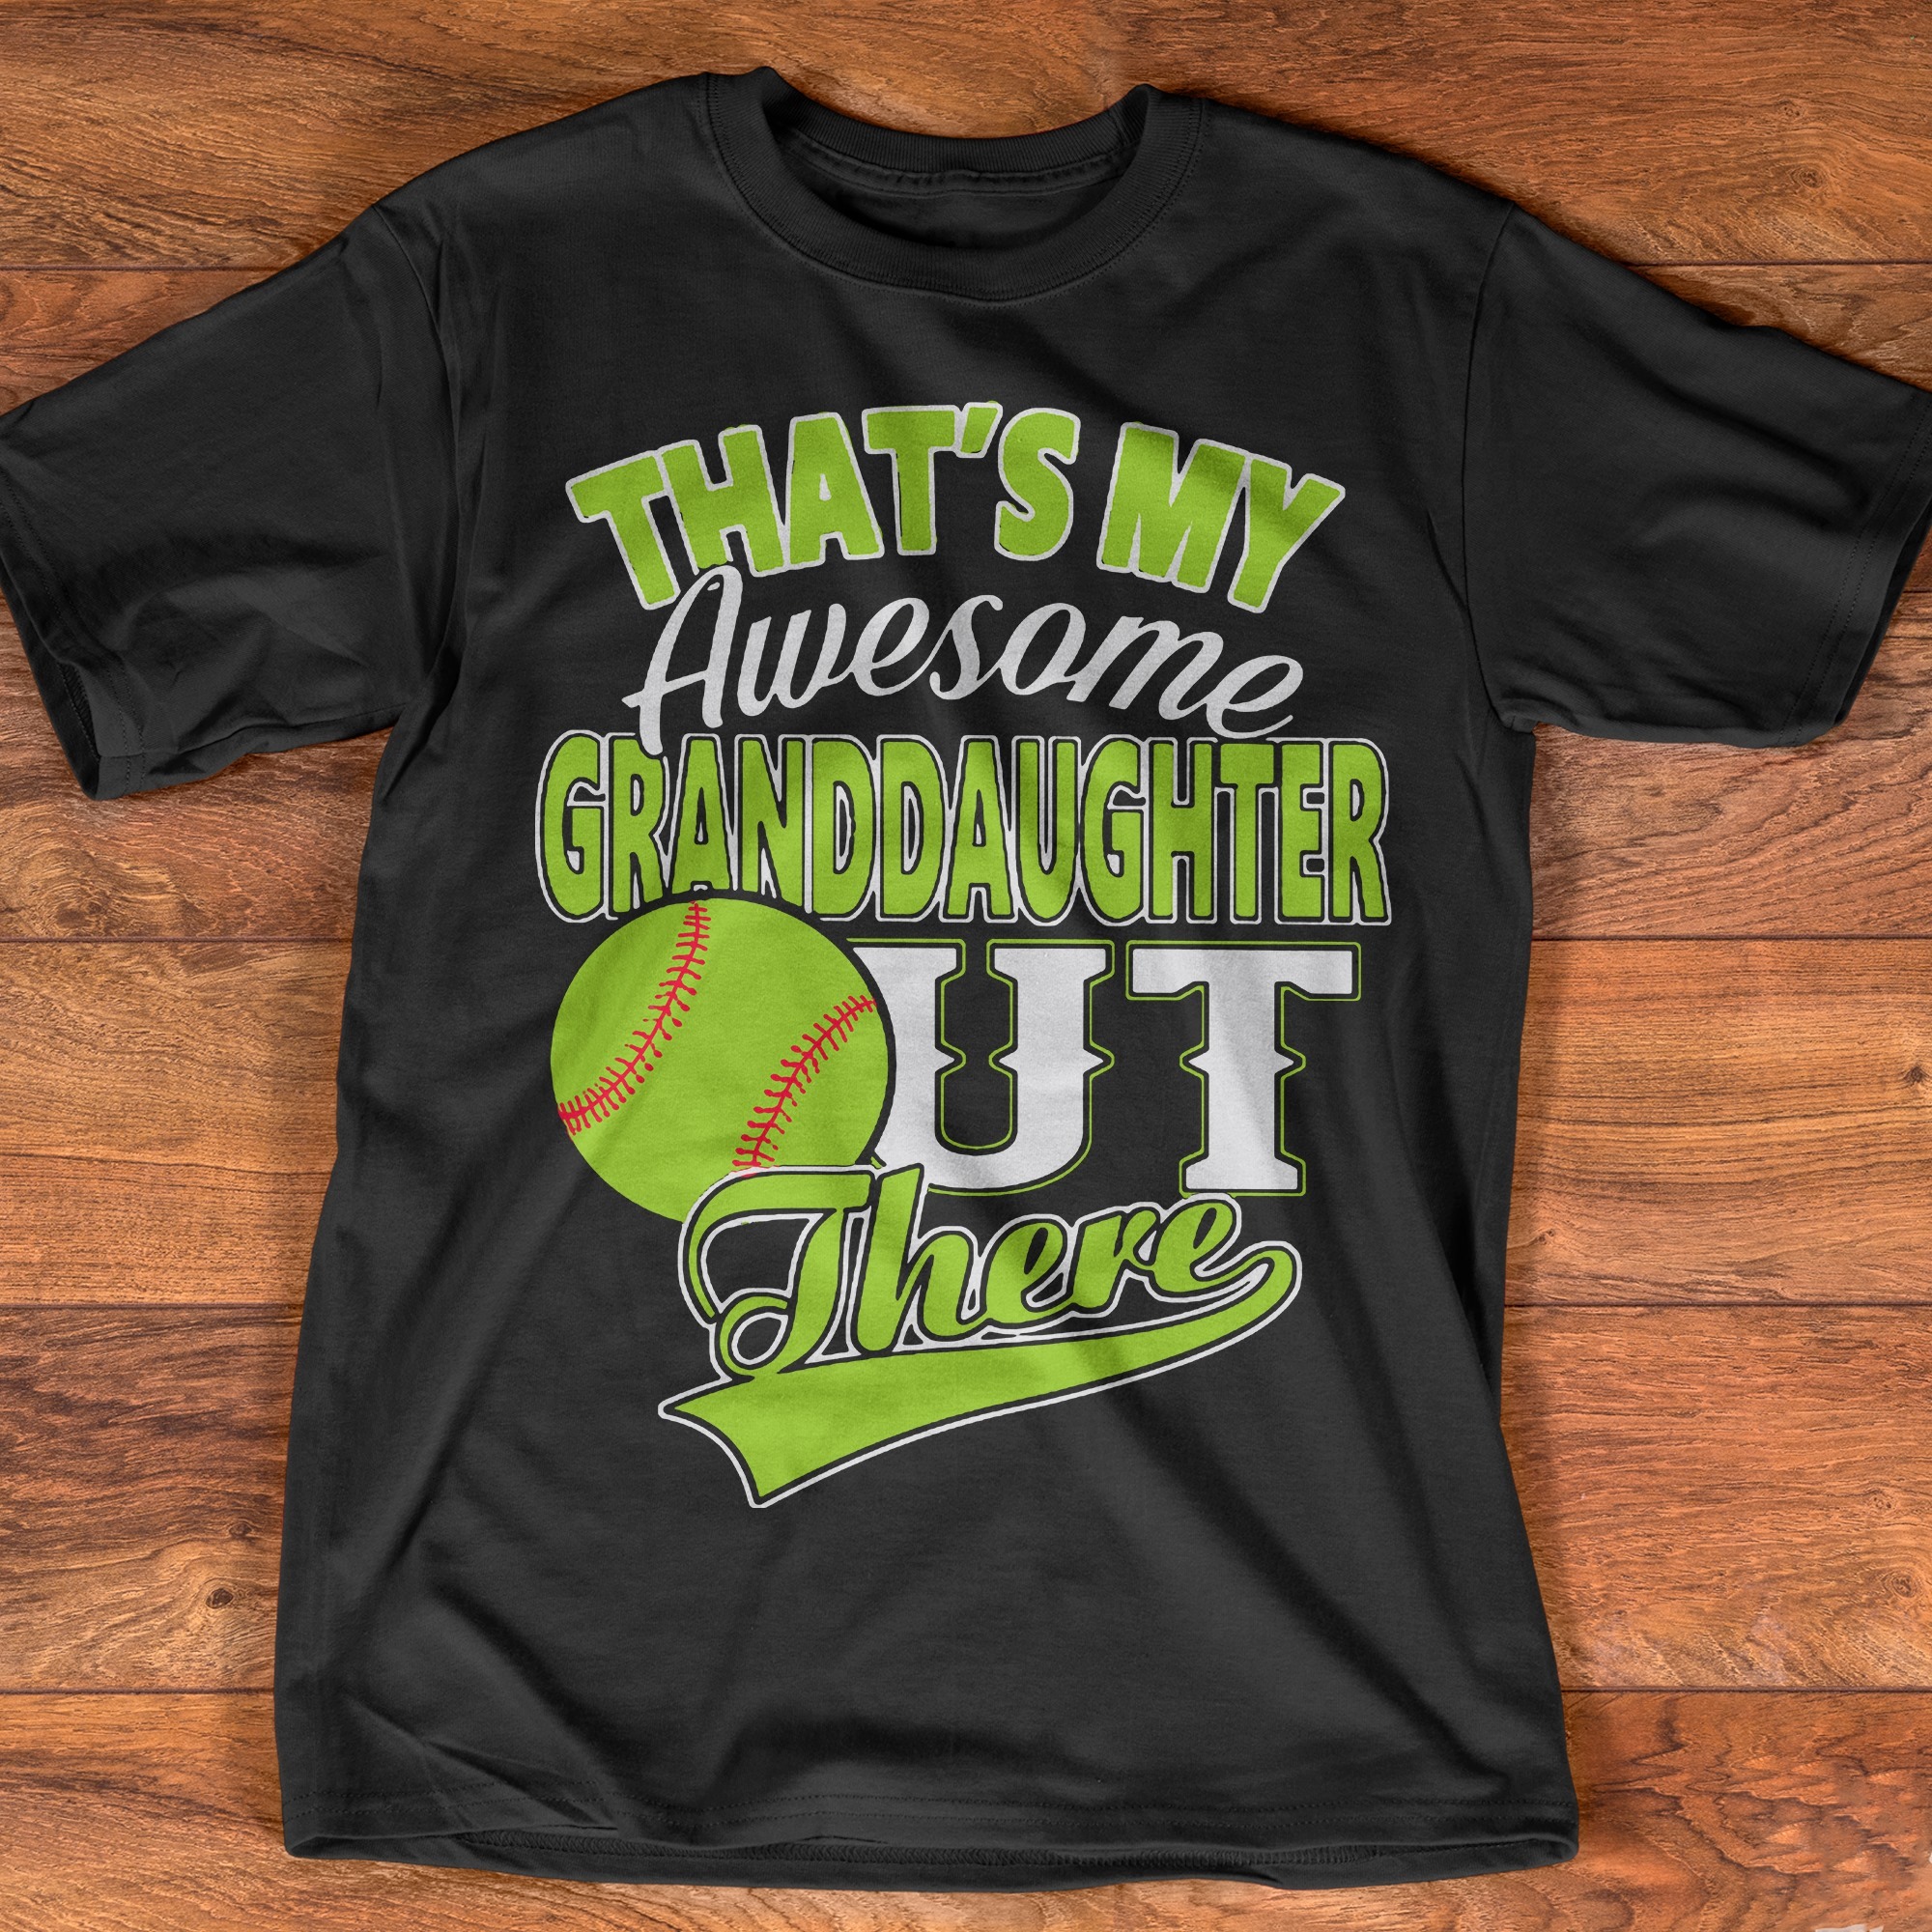 That's my awesome granddaughter out there - Baseball